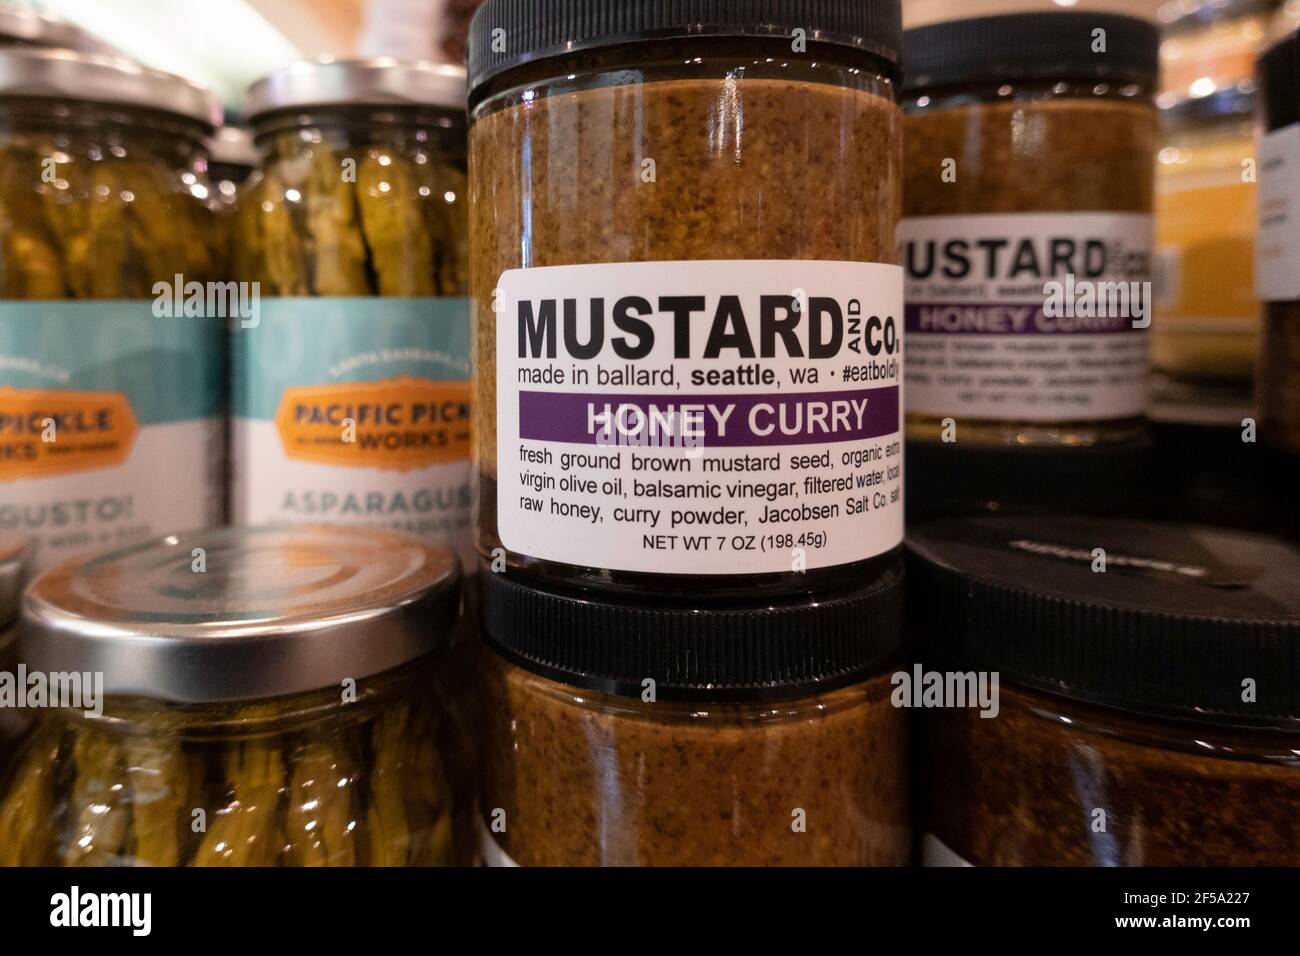 Murray's Cheese shop is in Grand Central Market, offering gourmet food items, NYC, USA Stock Photo